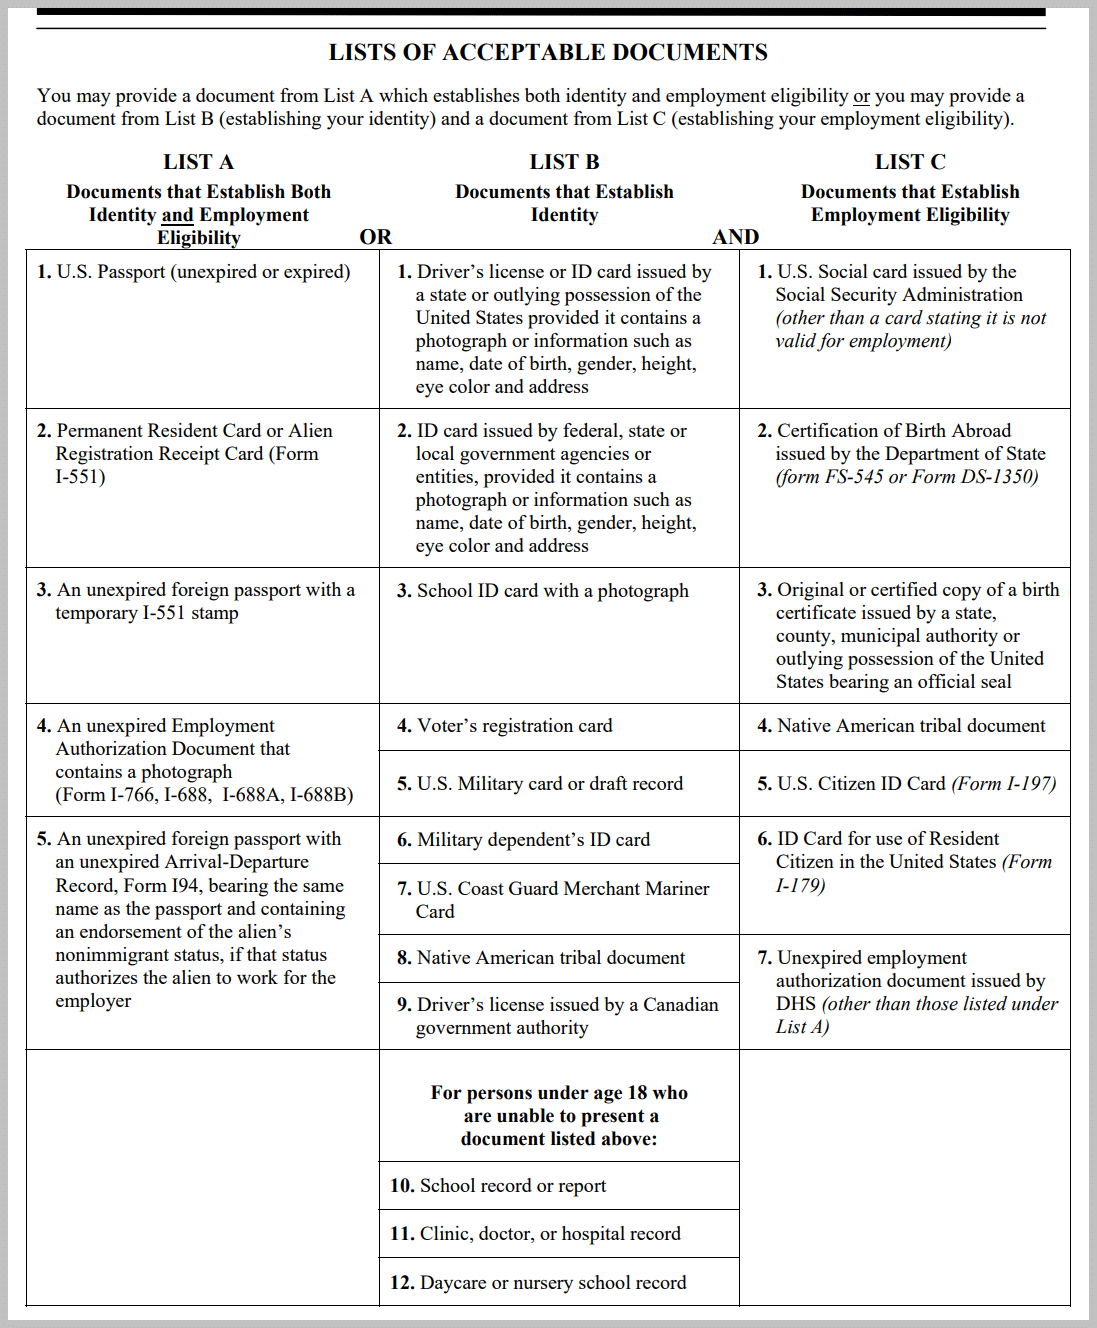 The Ultimate Guide To I-9 Compliance - I-9 Compliance regarding I-9 Form Requirements